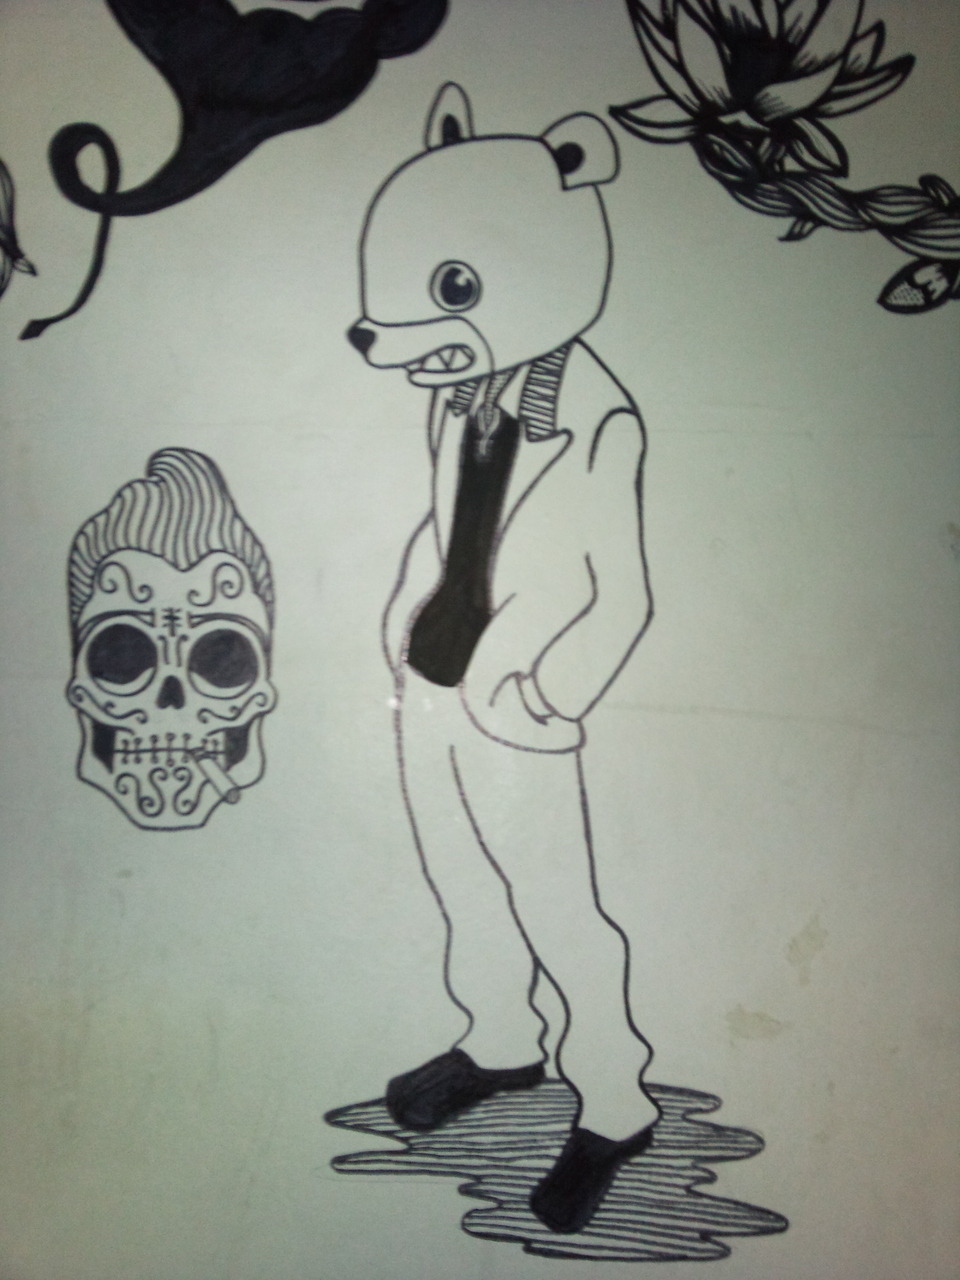 sharpie on wall, part of a mural im working on. follow me to see more if you like it.